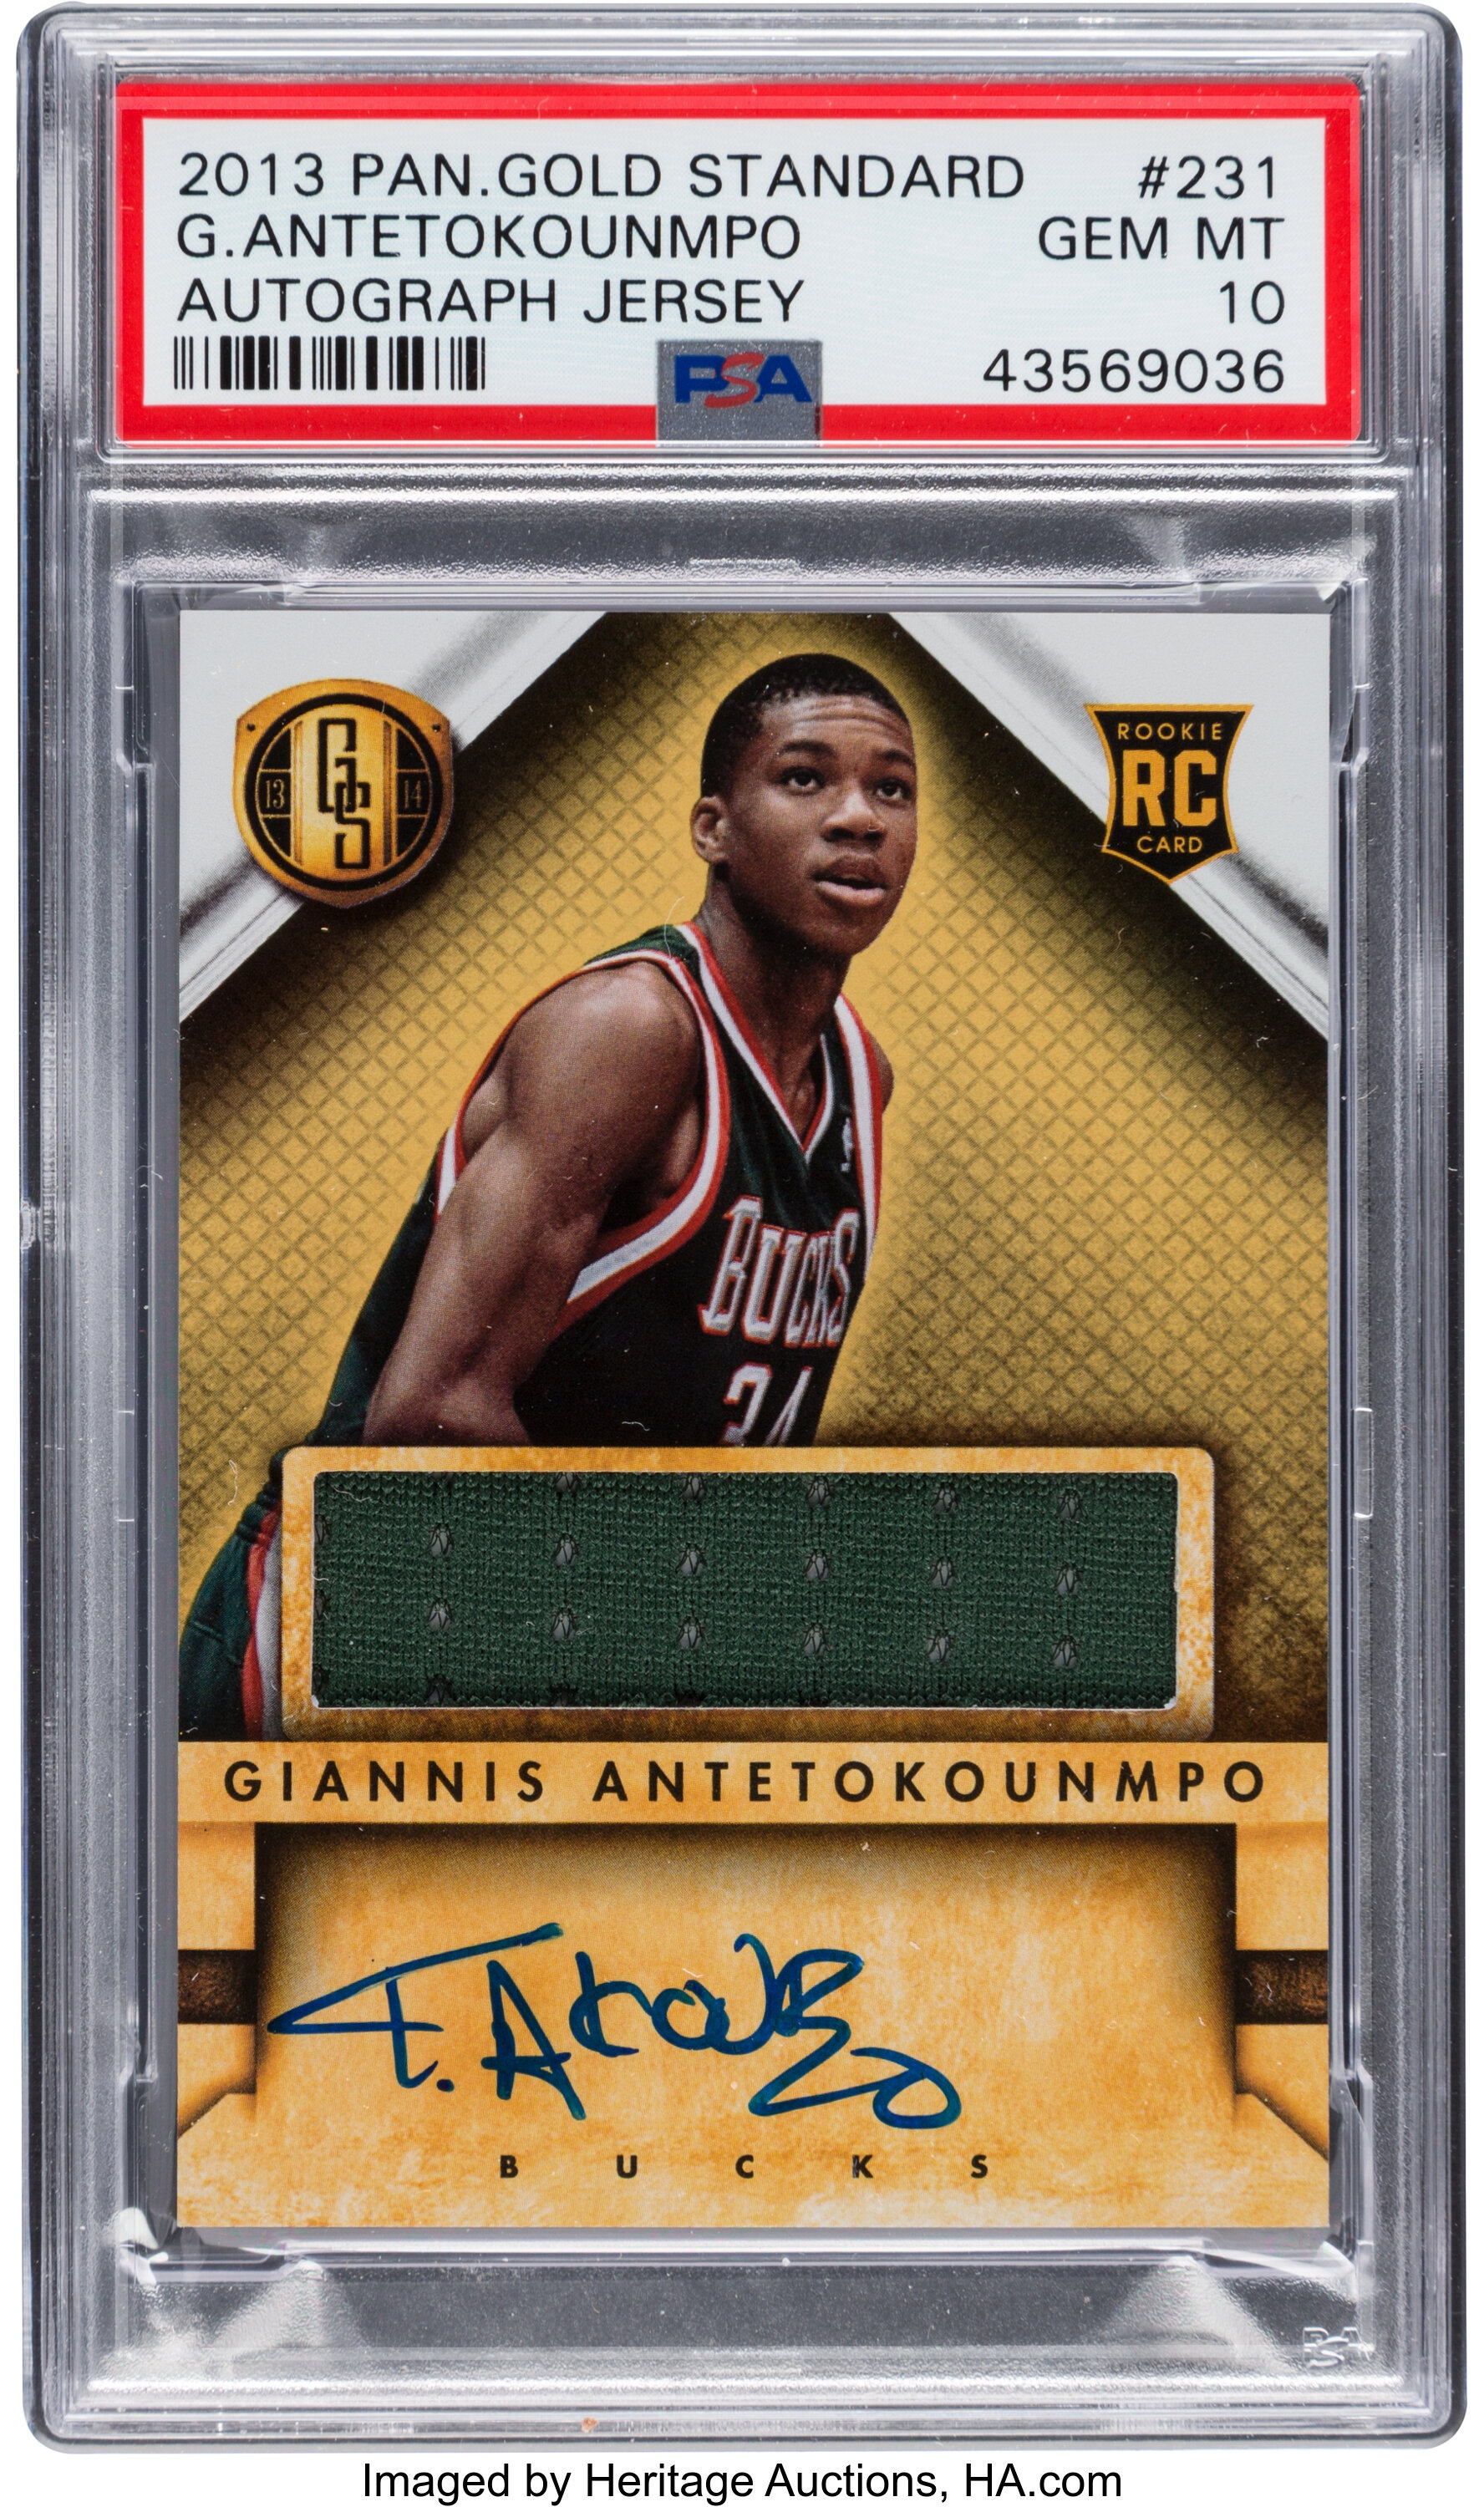 2013 14 Panini Gold Standard Giannis Antetokounmpo Rookie Relic Lot 81578 Heritage Auctions